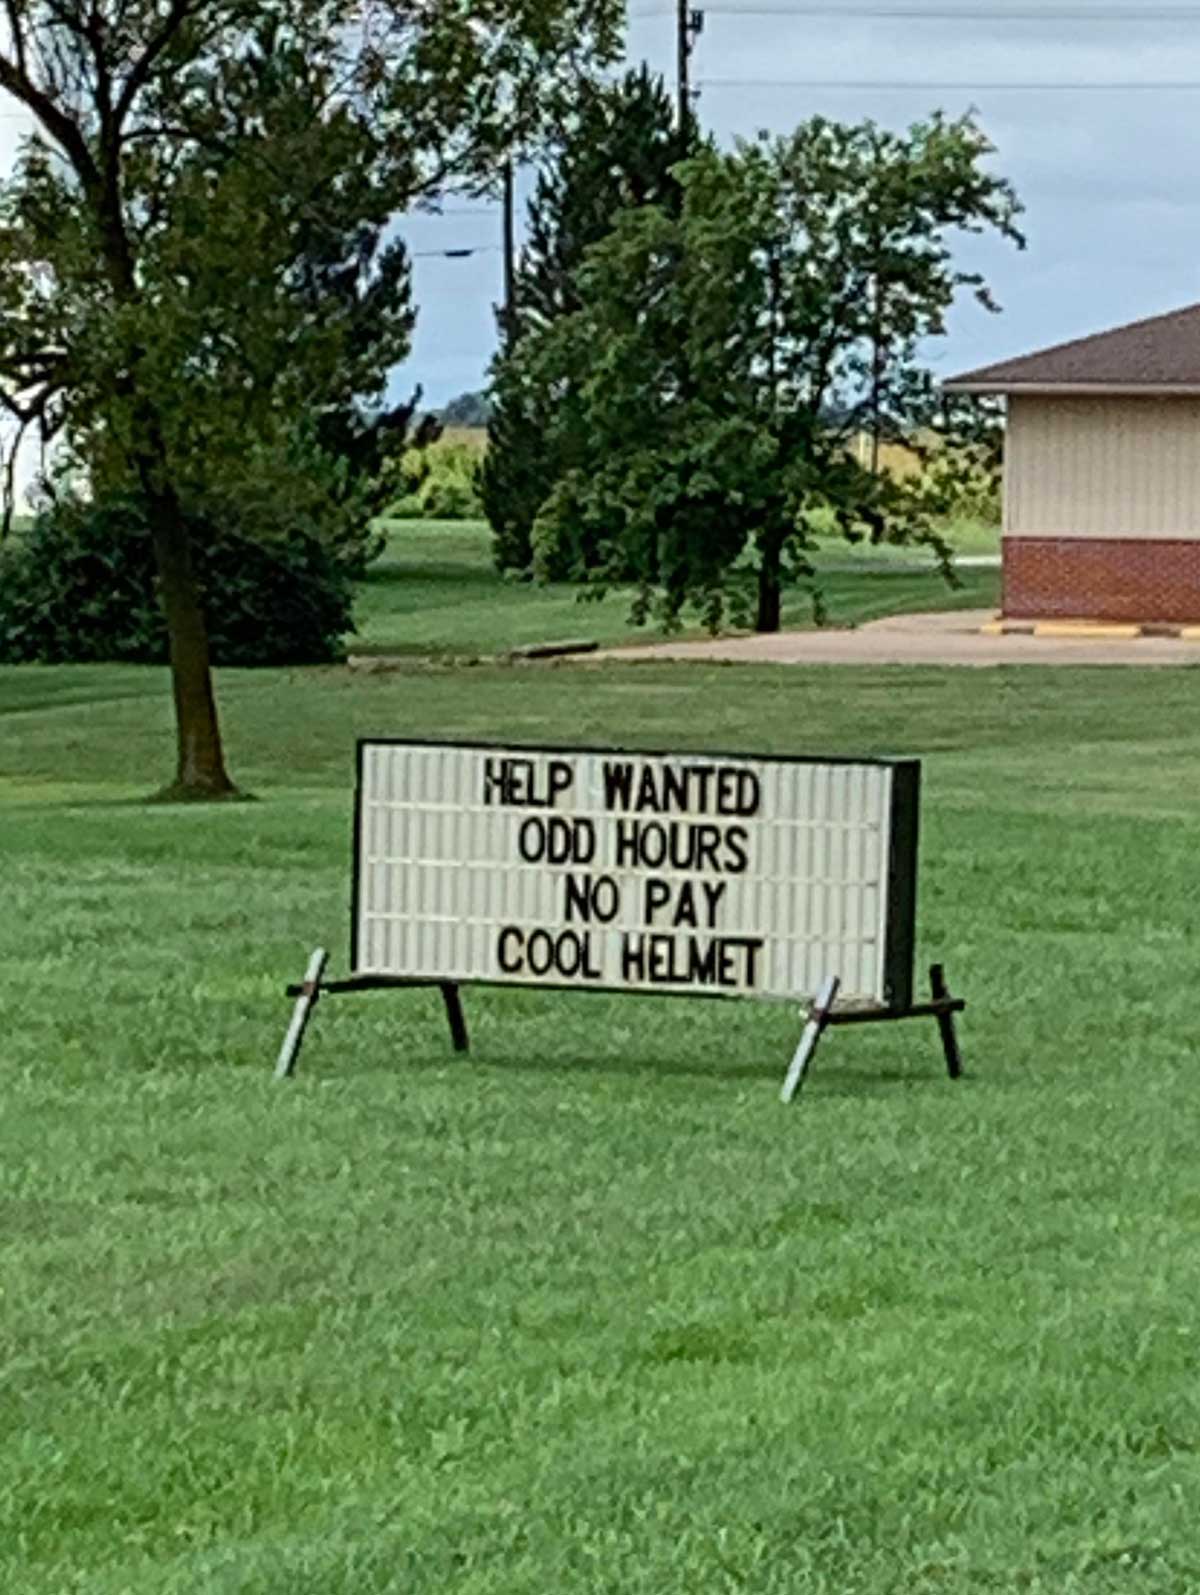 This sign I saw for a volunteer fire department